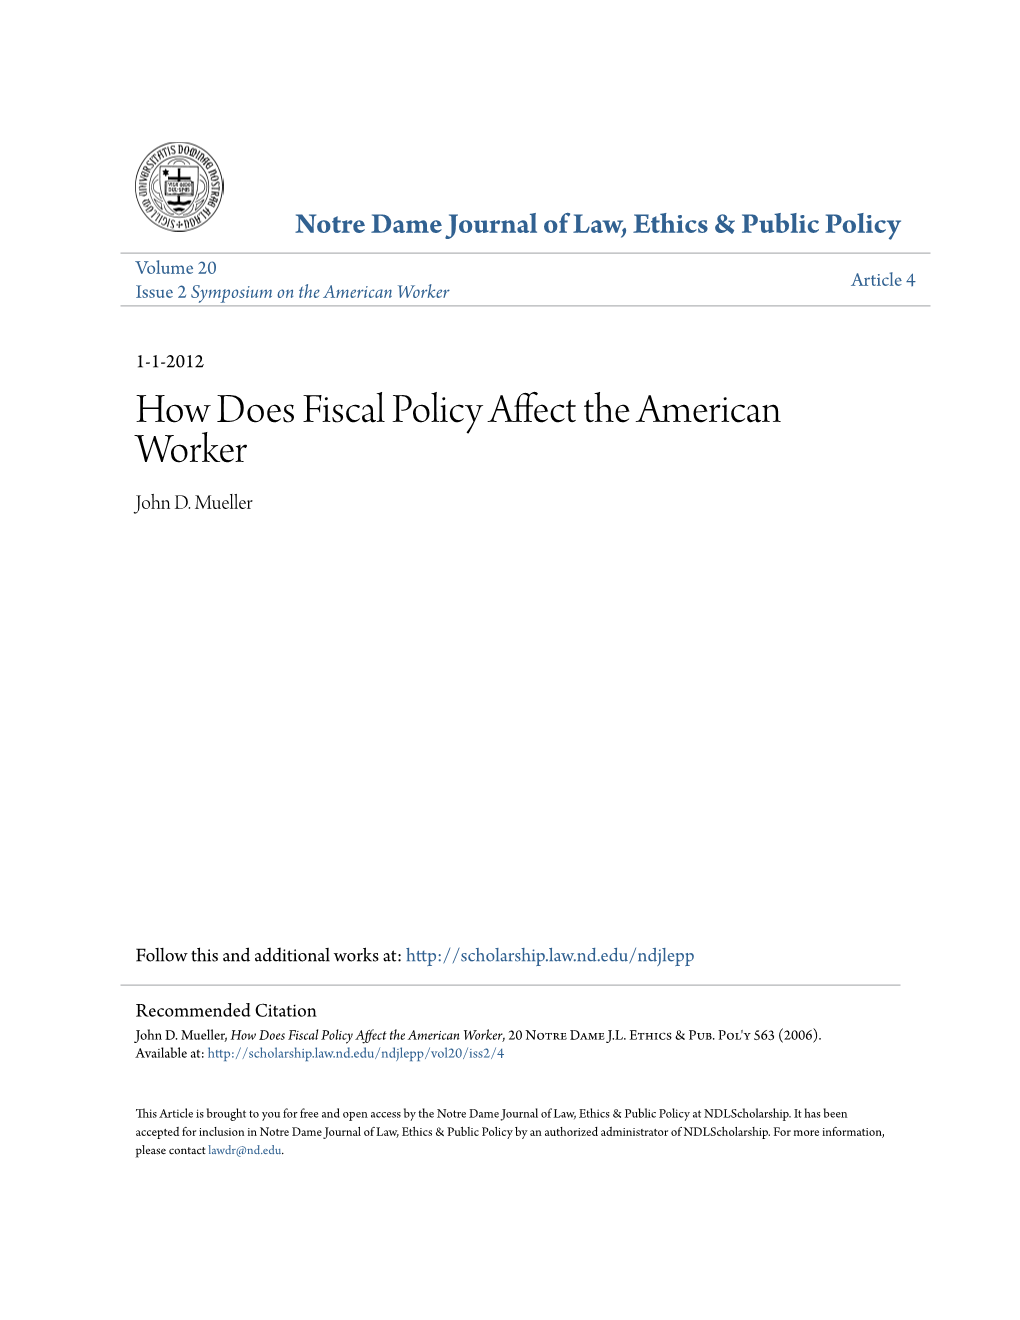 How Does Fiscal Policy Affect the American Worker John D